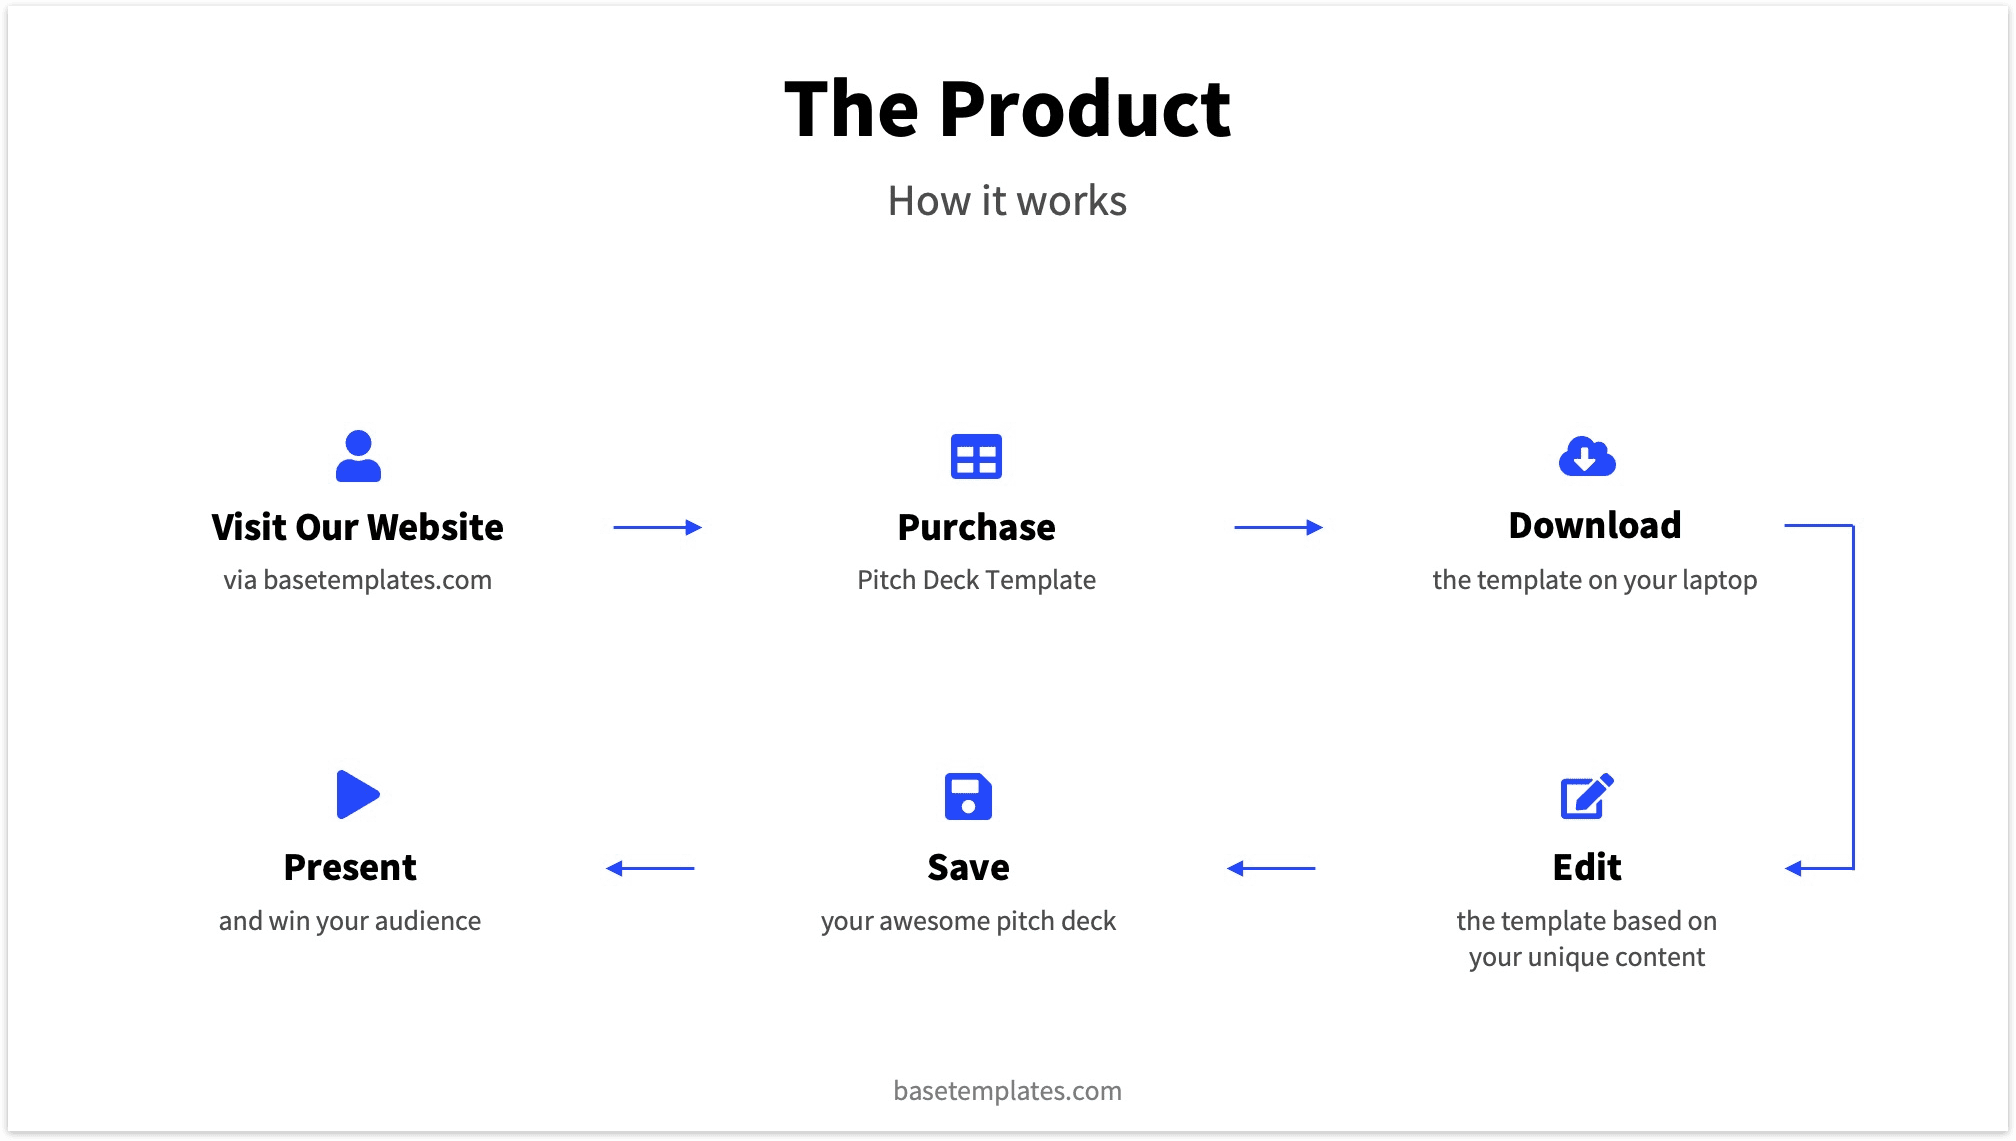 Product Pitch Template